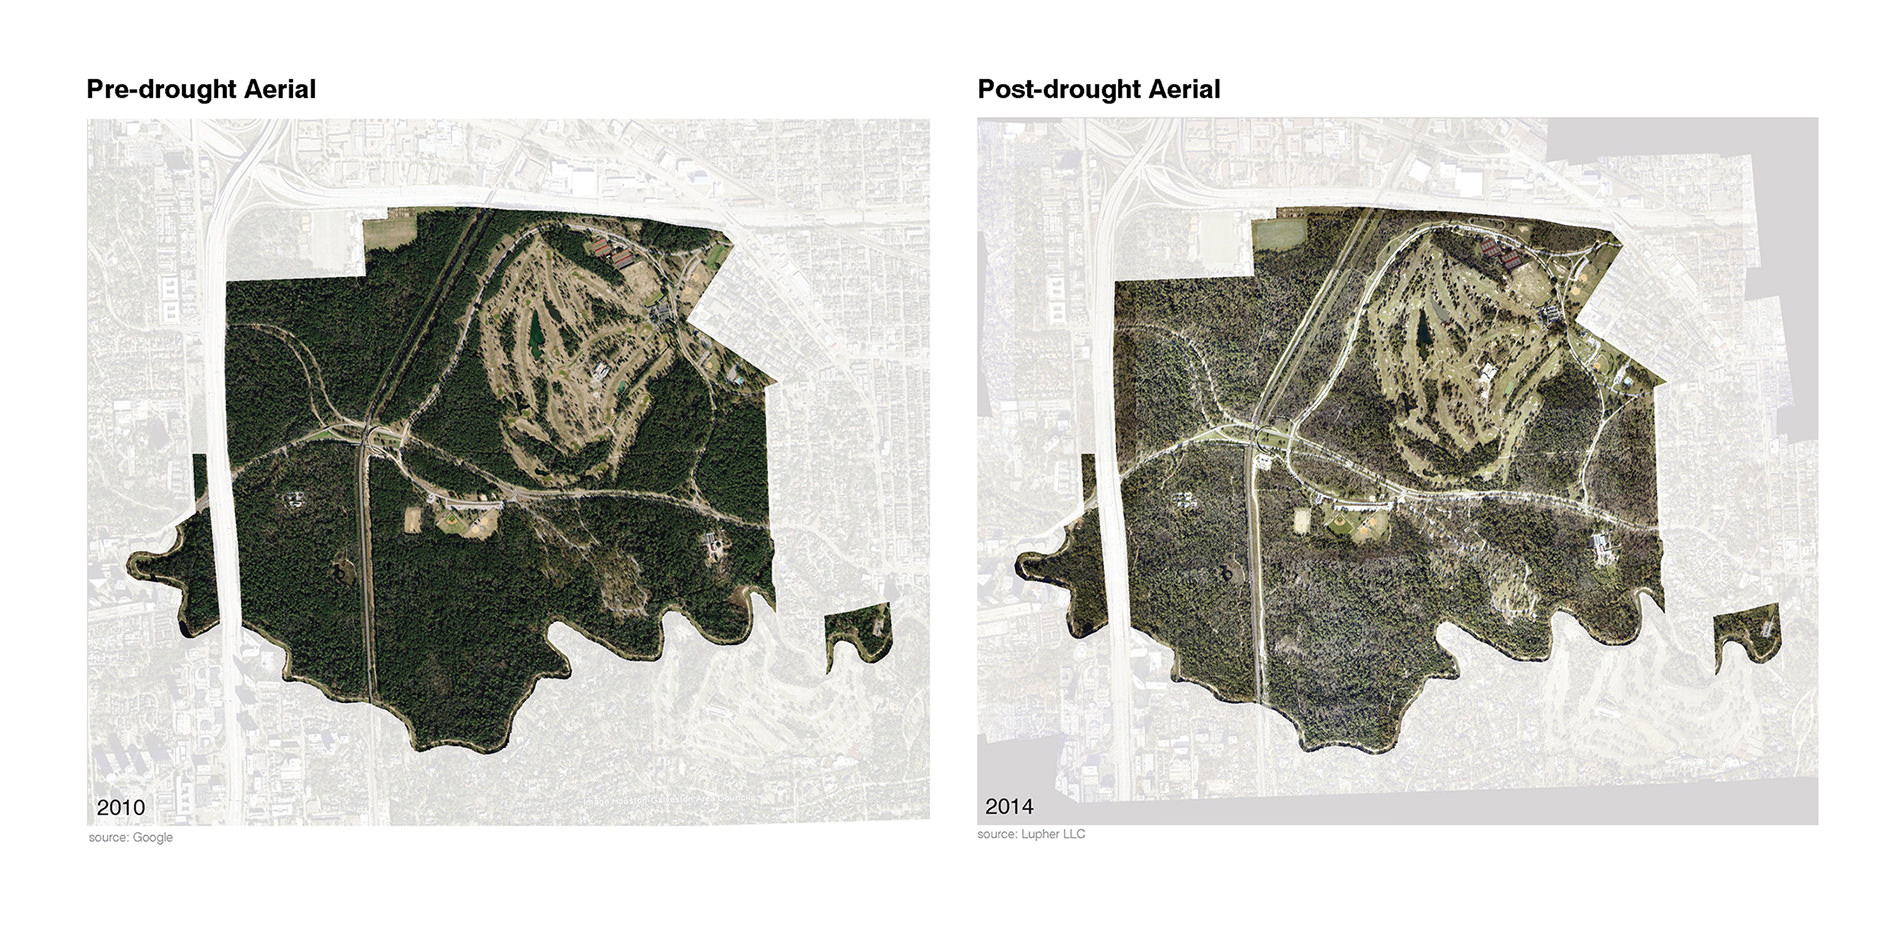 Pre-drought Aerial and Post-drought Aerial